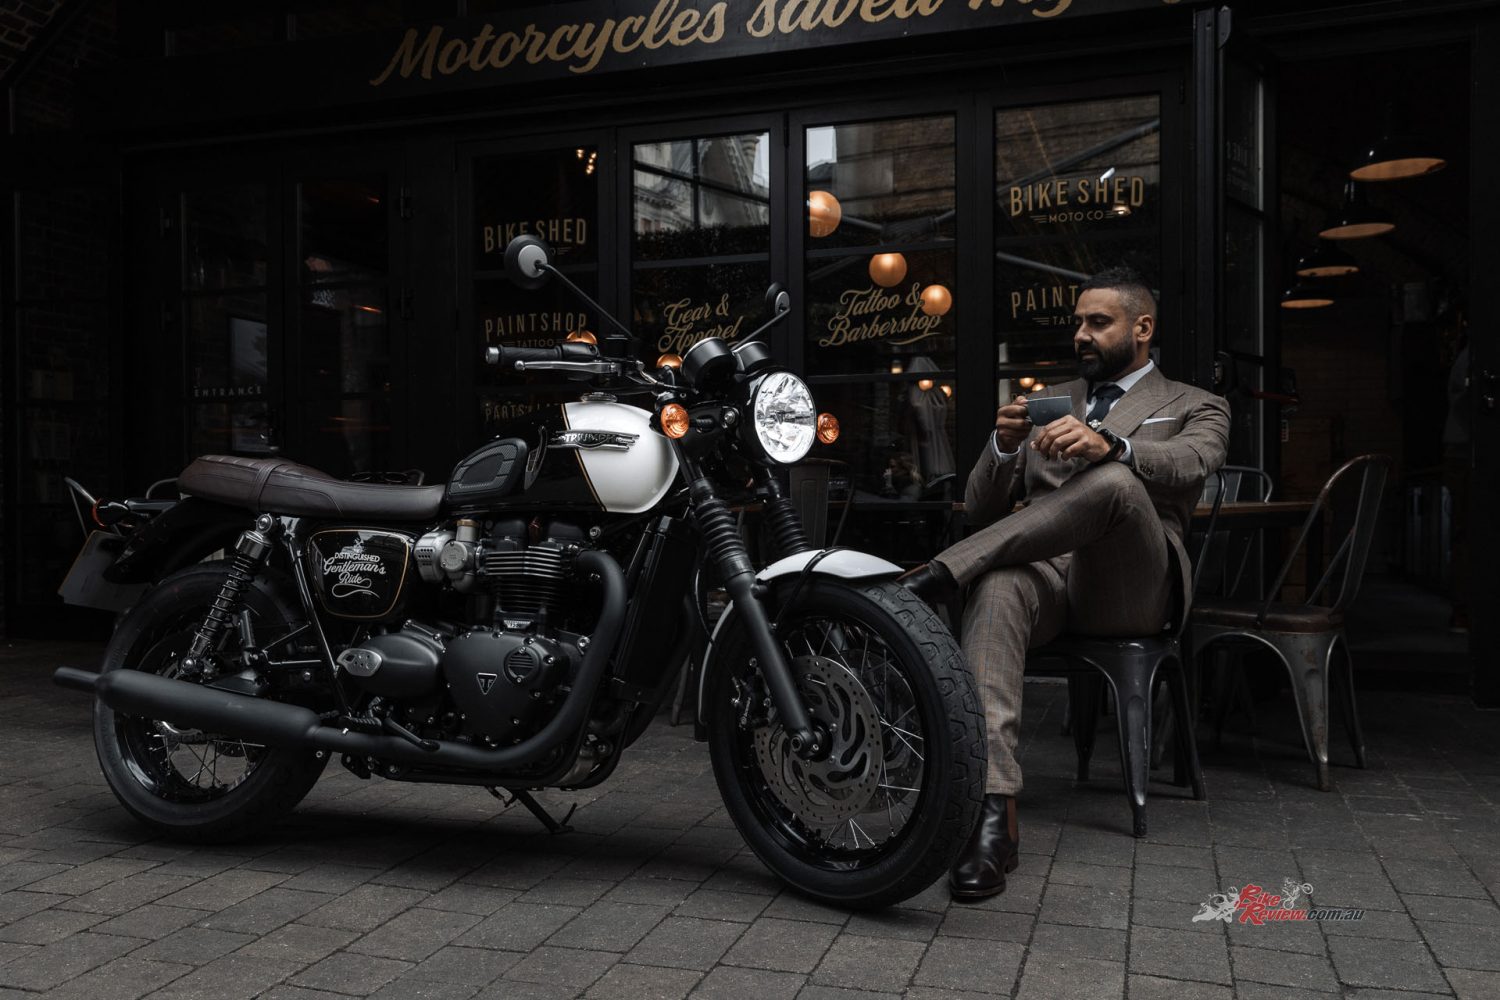 DGR founder, Mark Hawwa: "If anyone had said 10 years ago that we'd be celebrating a decade of partnership with Triumph Motorcycles, I would have laughed. That first year of signing with Triumph has always been a highlight for me."